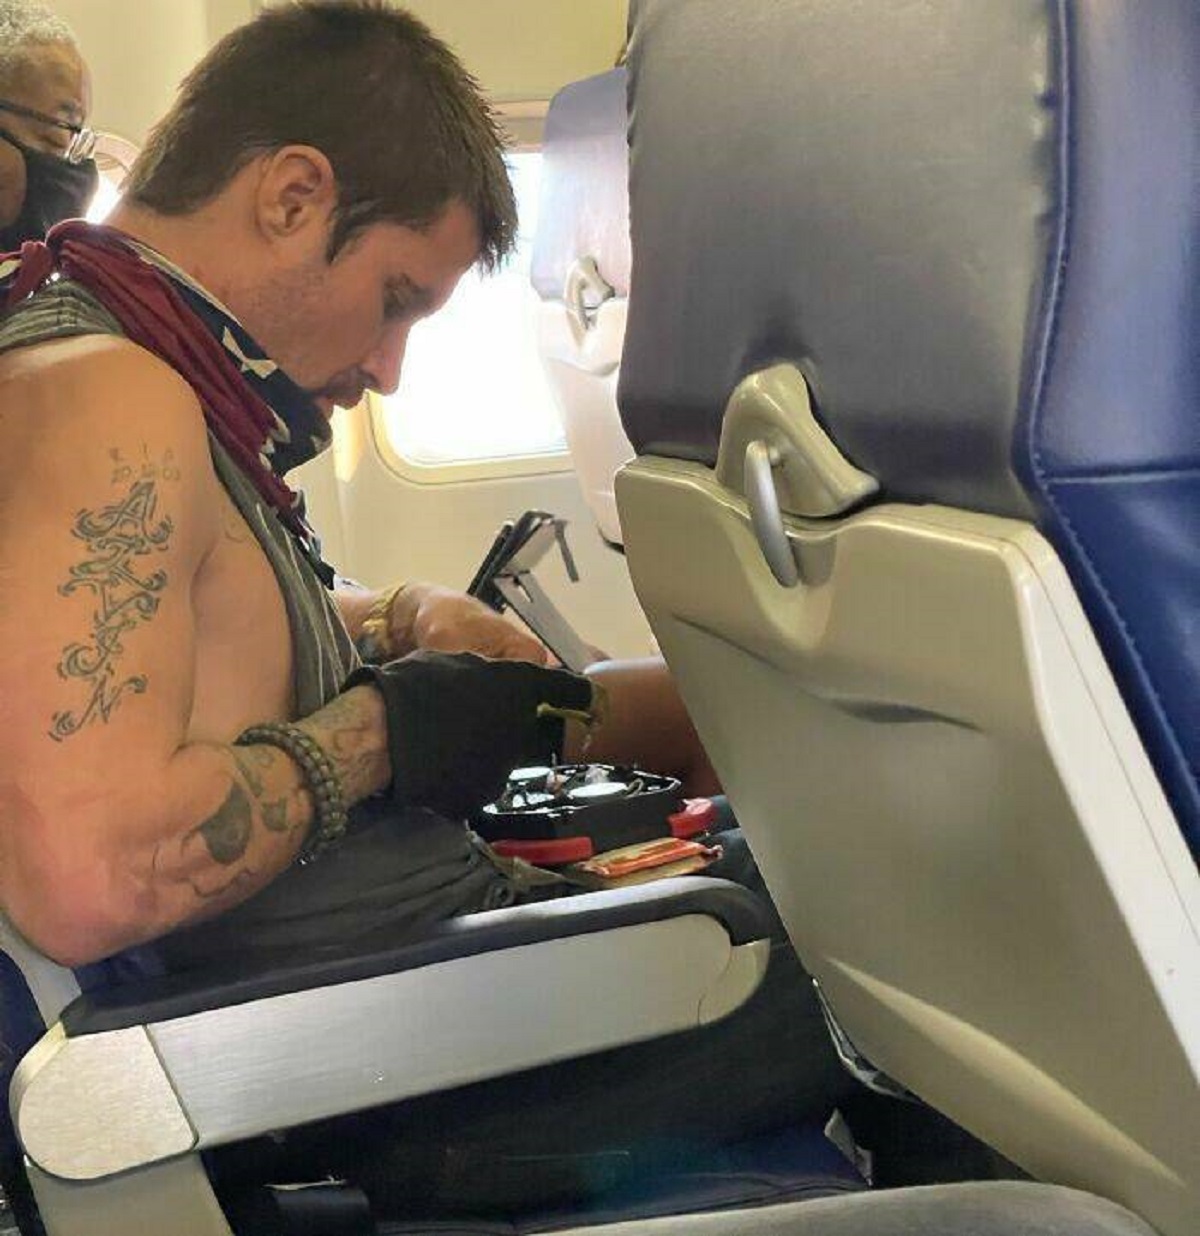 "Man On My Southwest Flight Tying Battery Wires Together Mid-Flight"